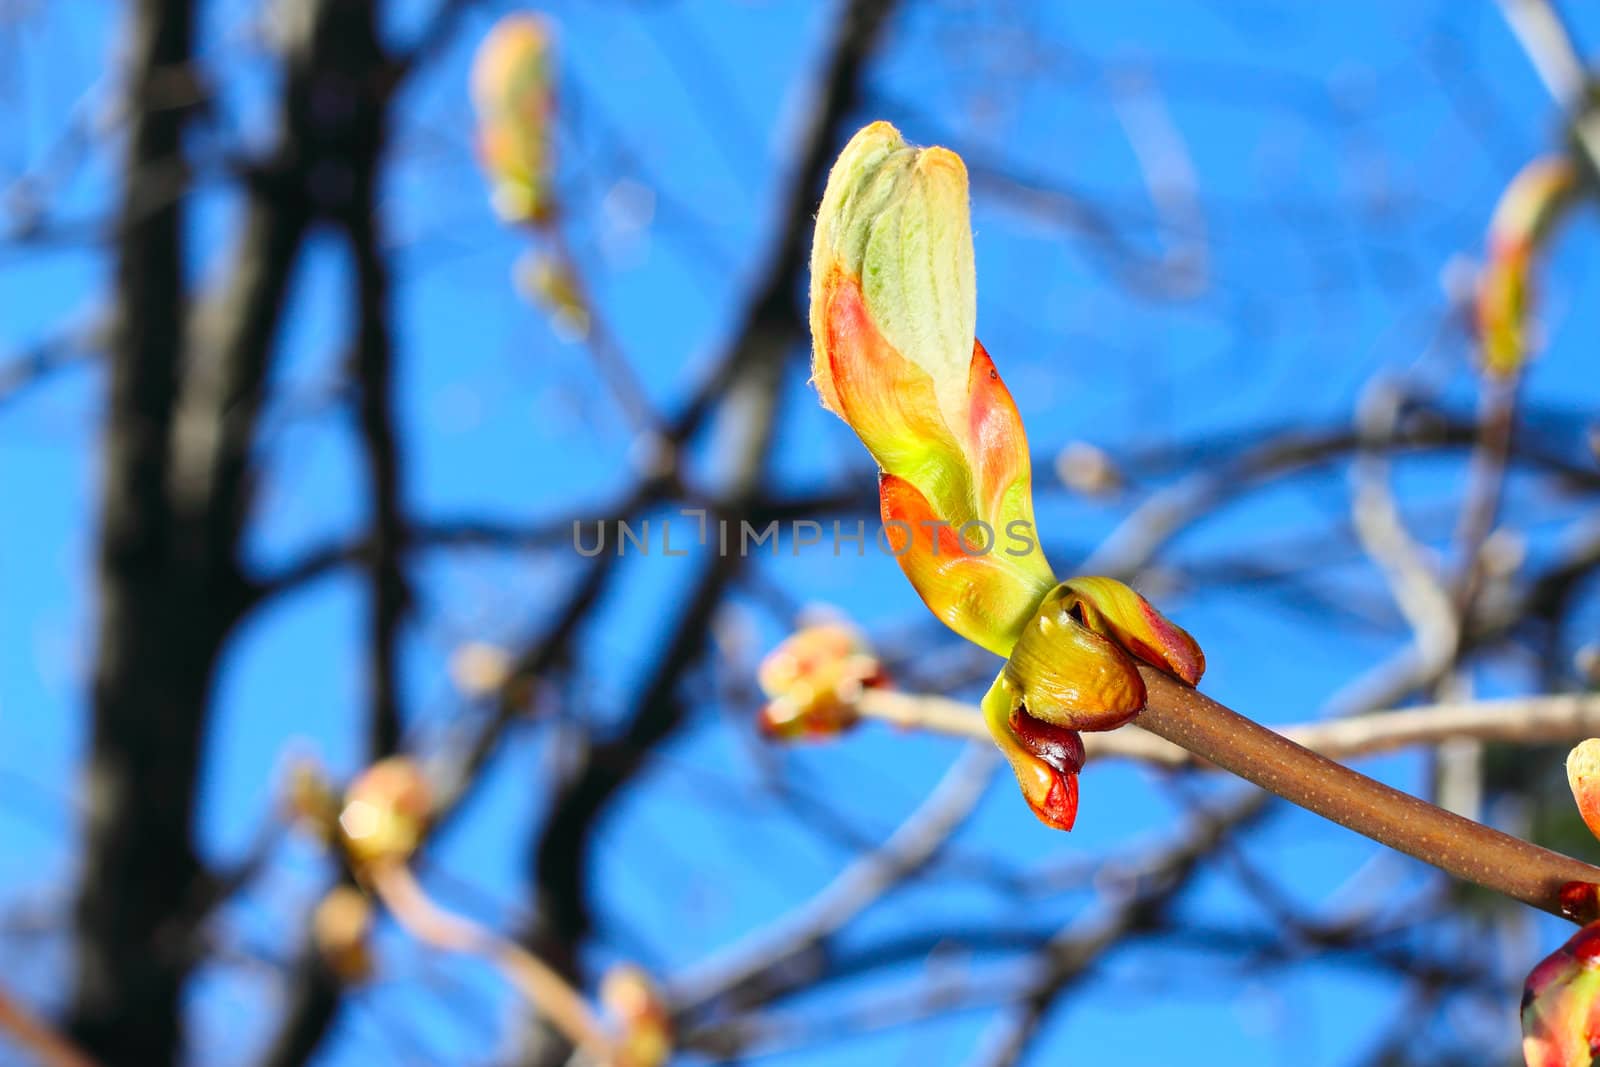 Huge bud on branch with blue sky background